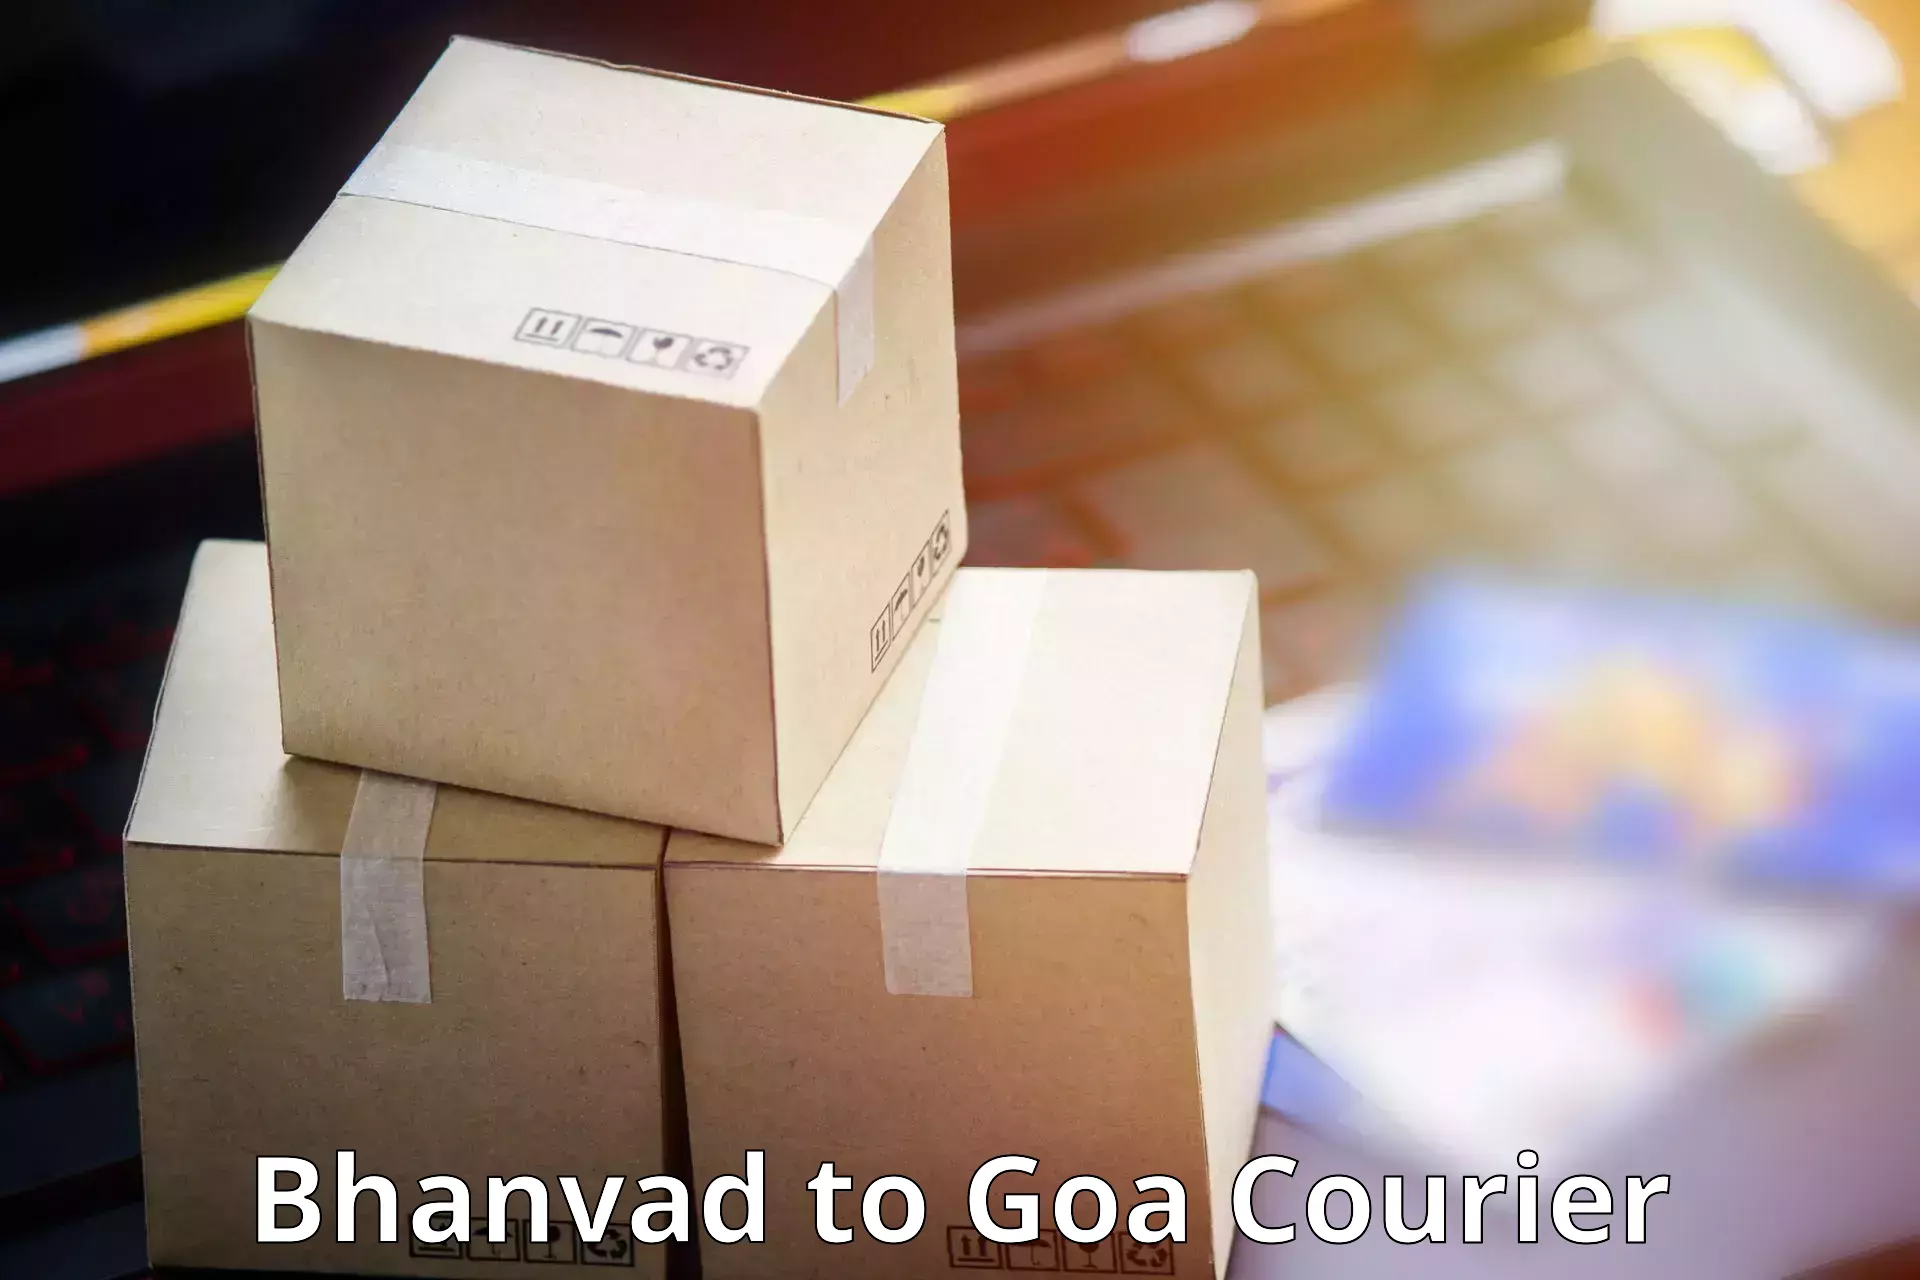 Postal and courier services Bhanvad to Ponda